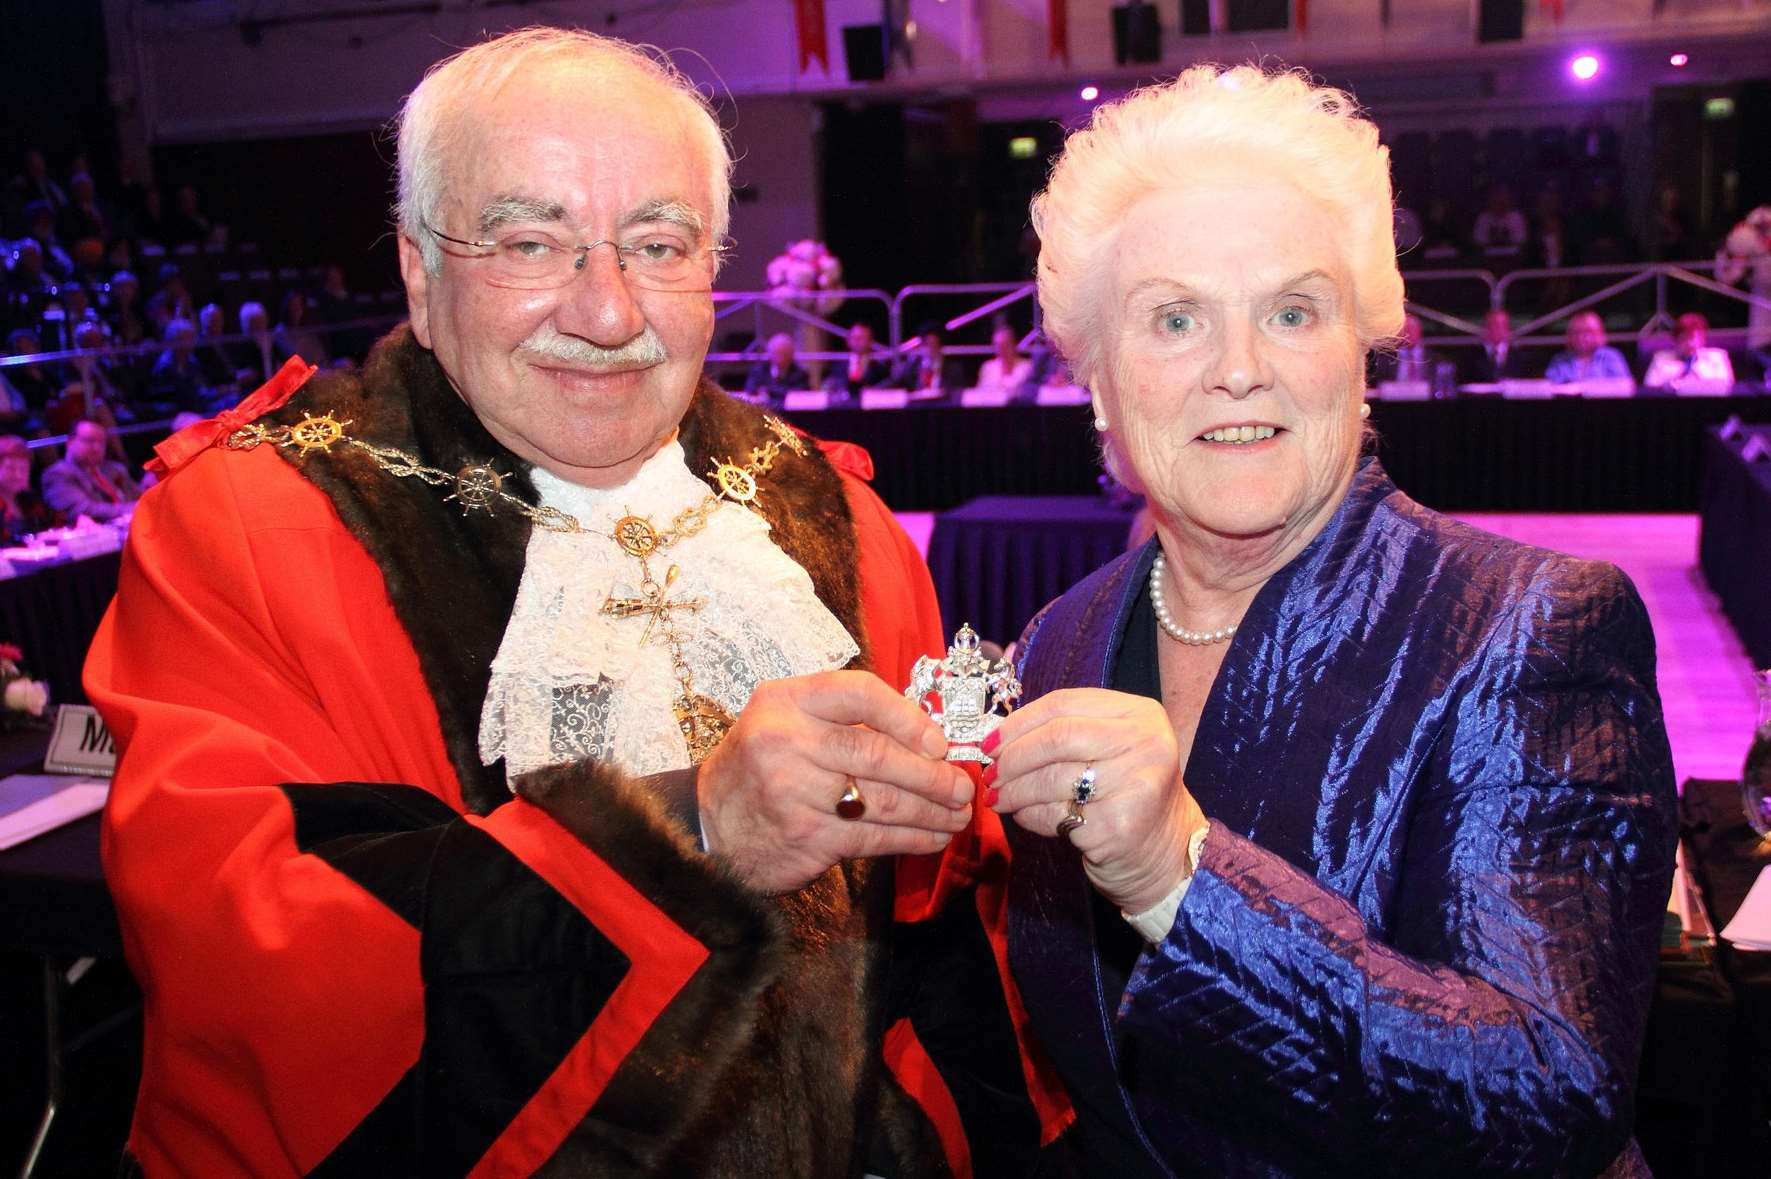 Cllr Harold Craske is the new Mayor of Gravesham, taking over from Cllr Greta Goatley. Picture: Gravesham Borough Council